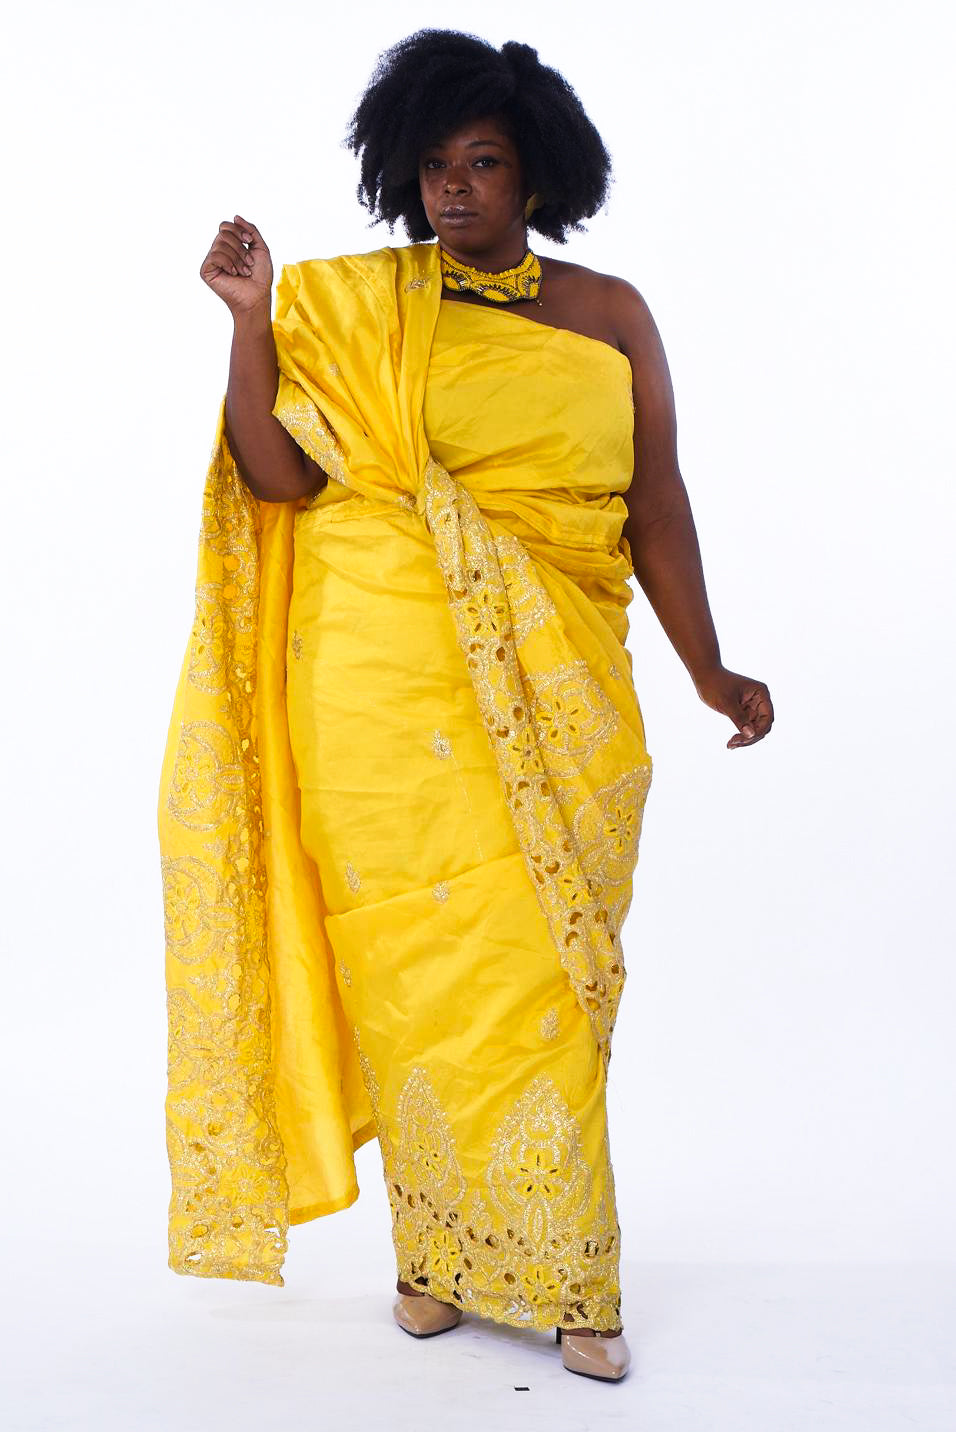 Photo of a woman wearing myObioma's long and yellow Nafrican Dress. The dress features comfortable fabric that is carefully knotted around the waist and thrown over the shoulder. It is imprinted with delicate gold patterns around the hem and across the dress.